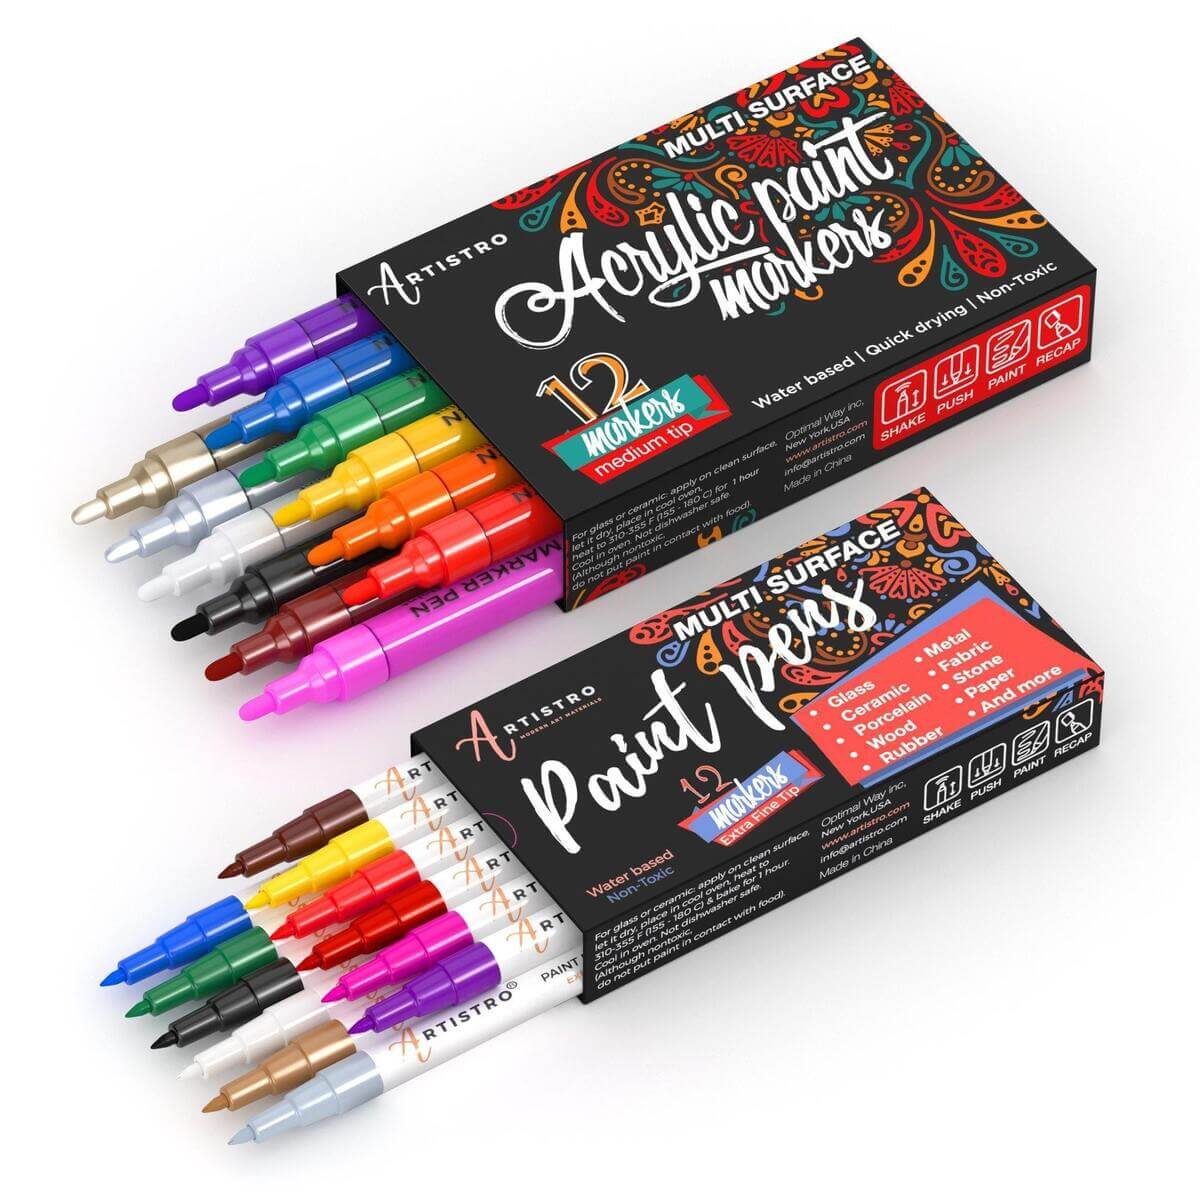 ARTISTRO Acrylic Paint Pens for Fabric, Glass, Wood, Extra Fine Tip, 12 Colored Paint Markers